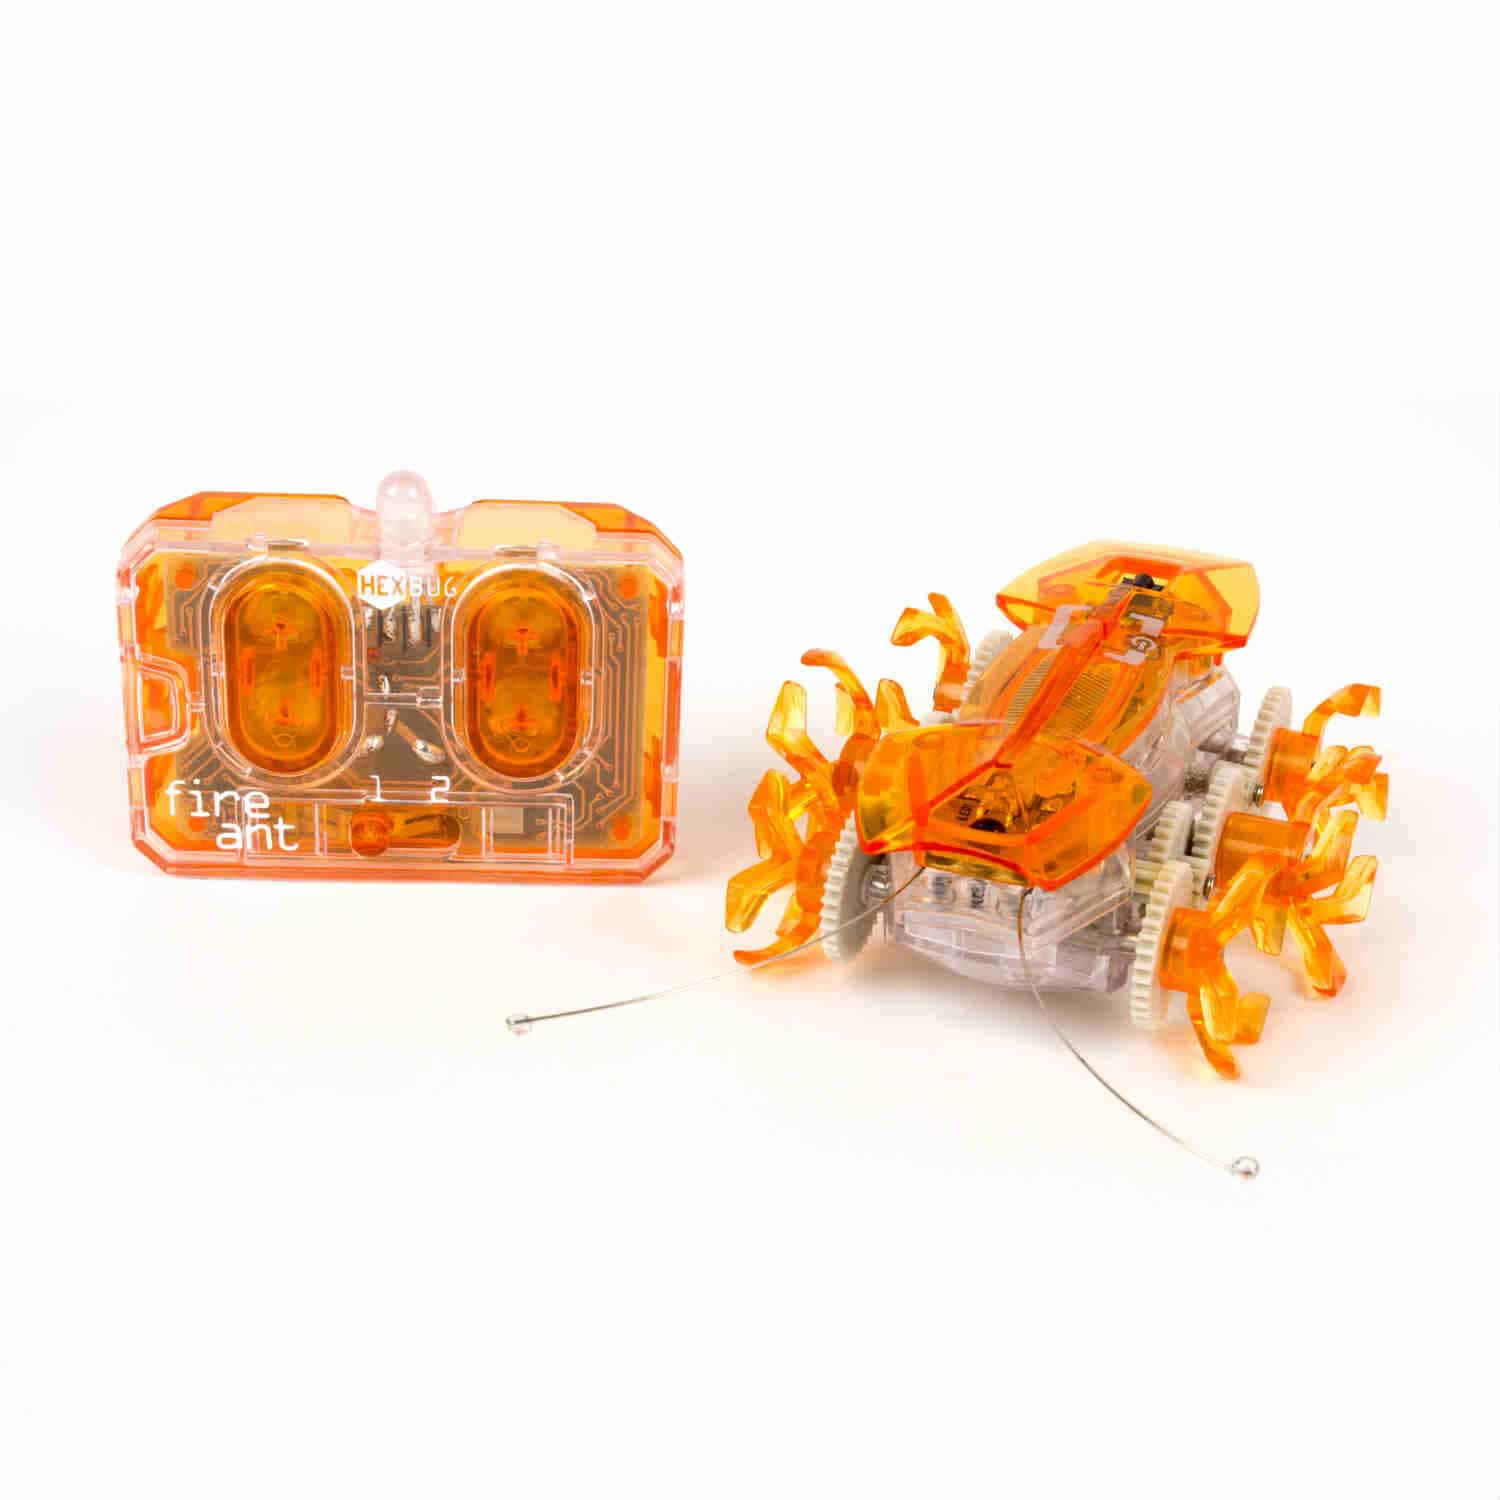 HEXBUG Remote Controlled Fire ANT Micro Robotic Creature Blue Ages 8 for sale online 